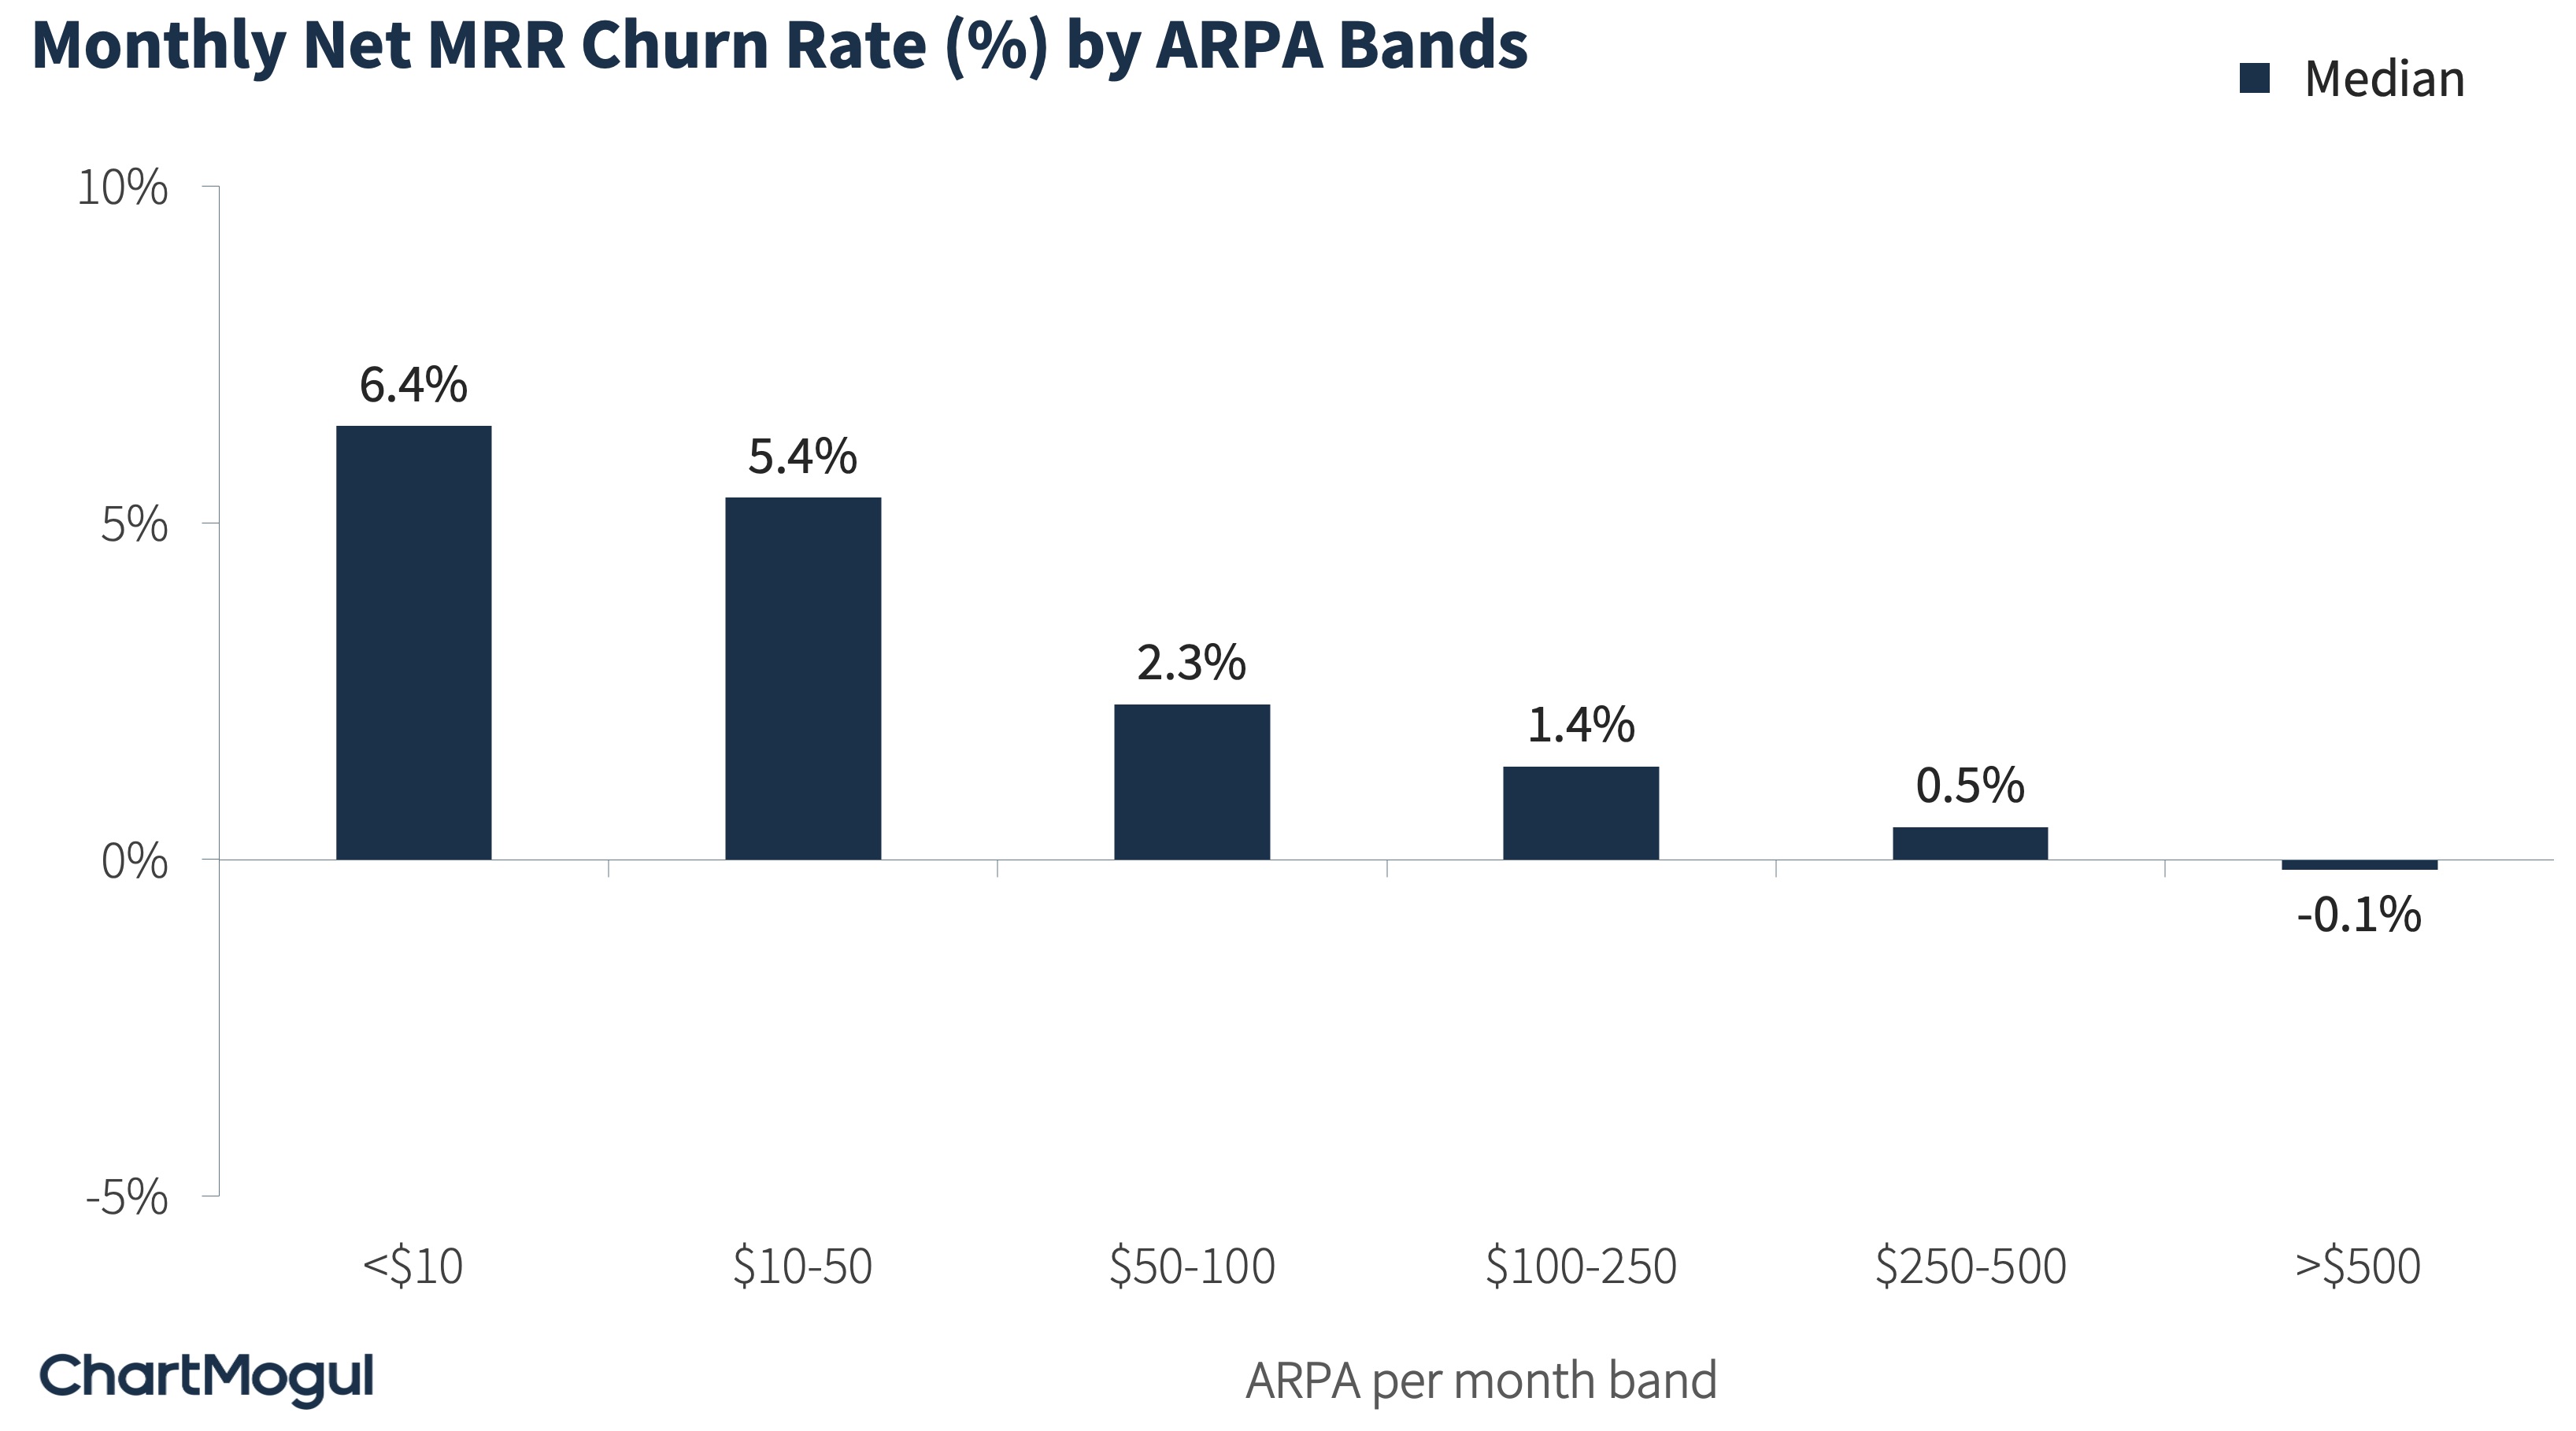 Monthly net MRR churn rate by ARPA bands